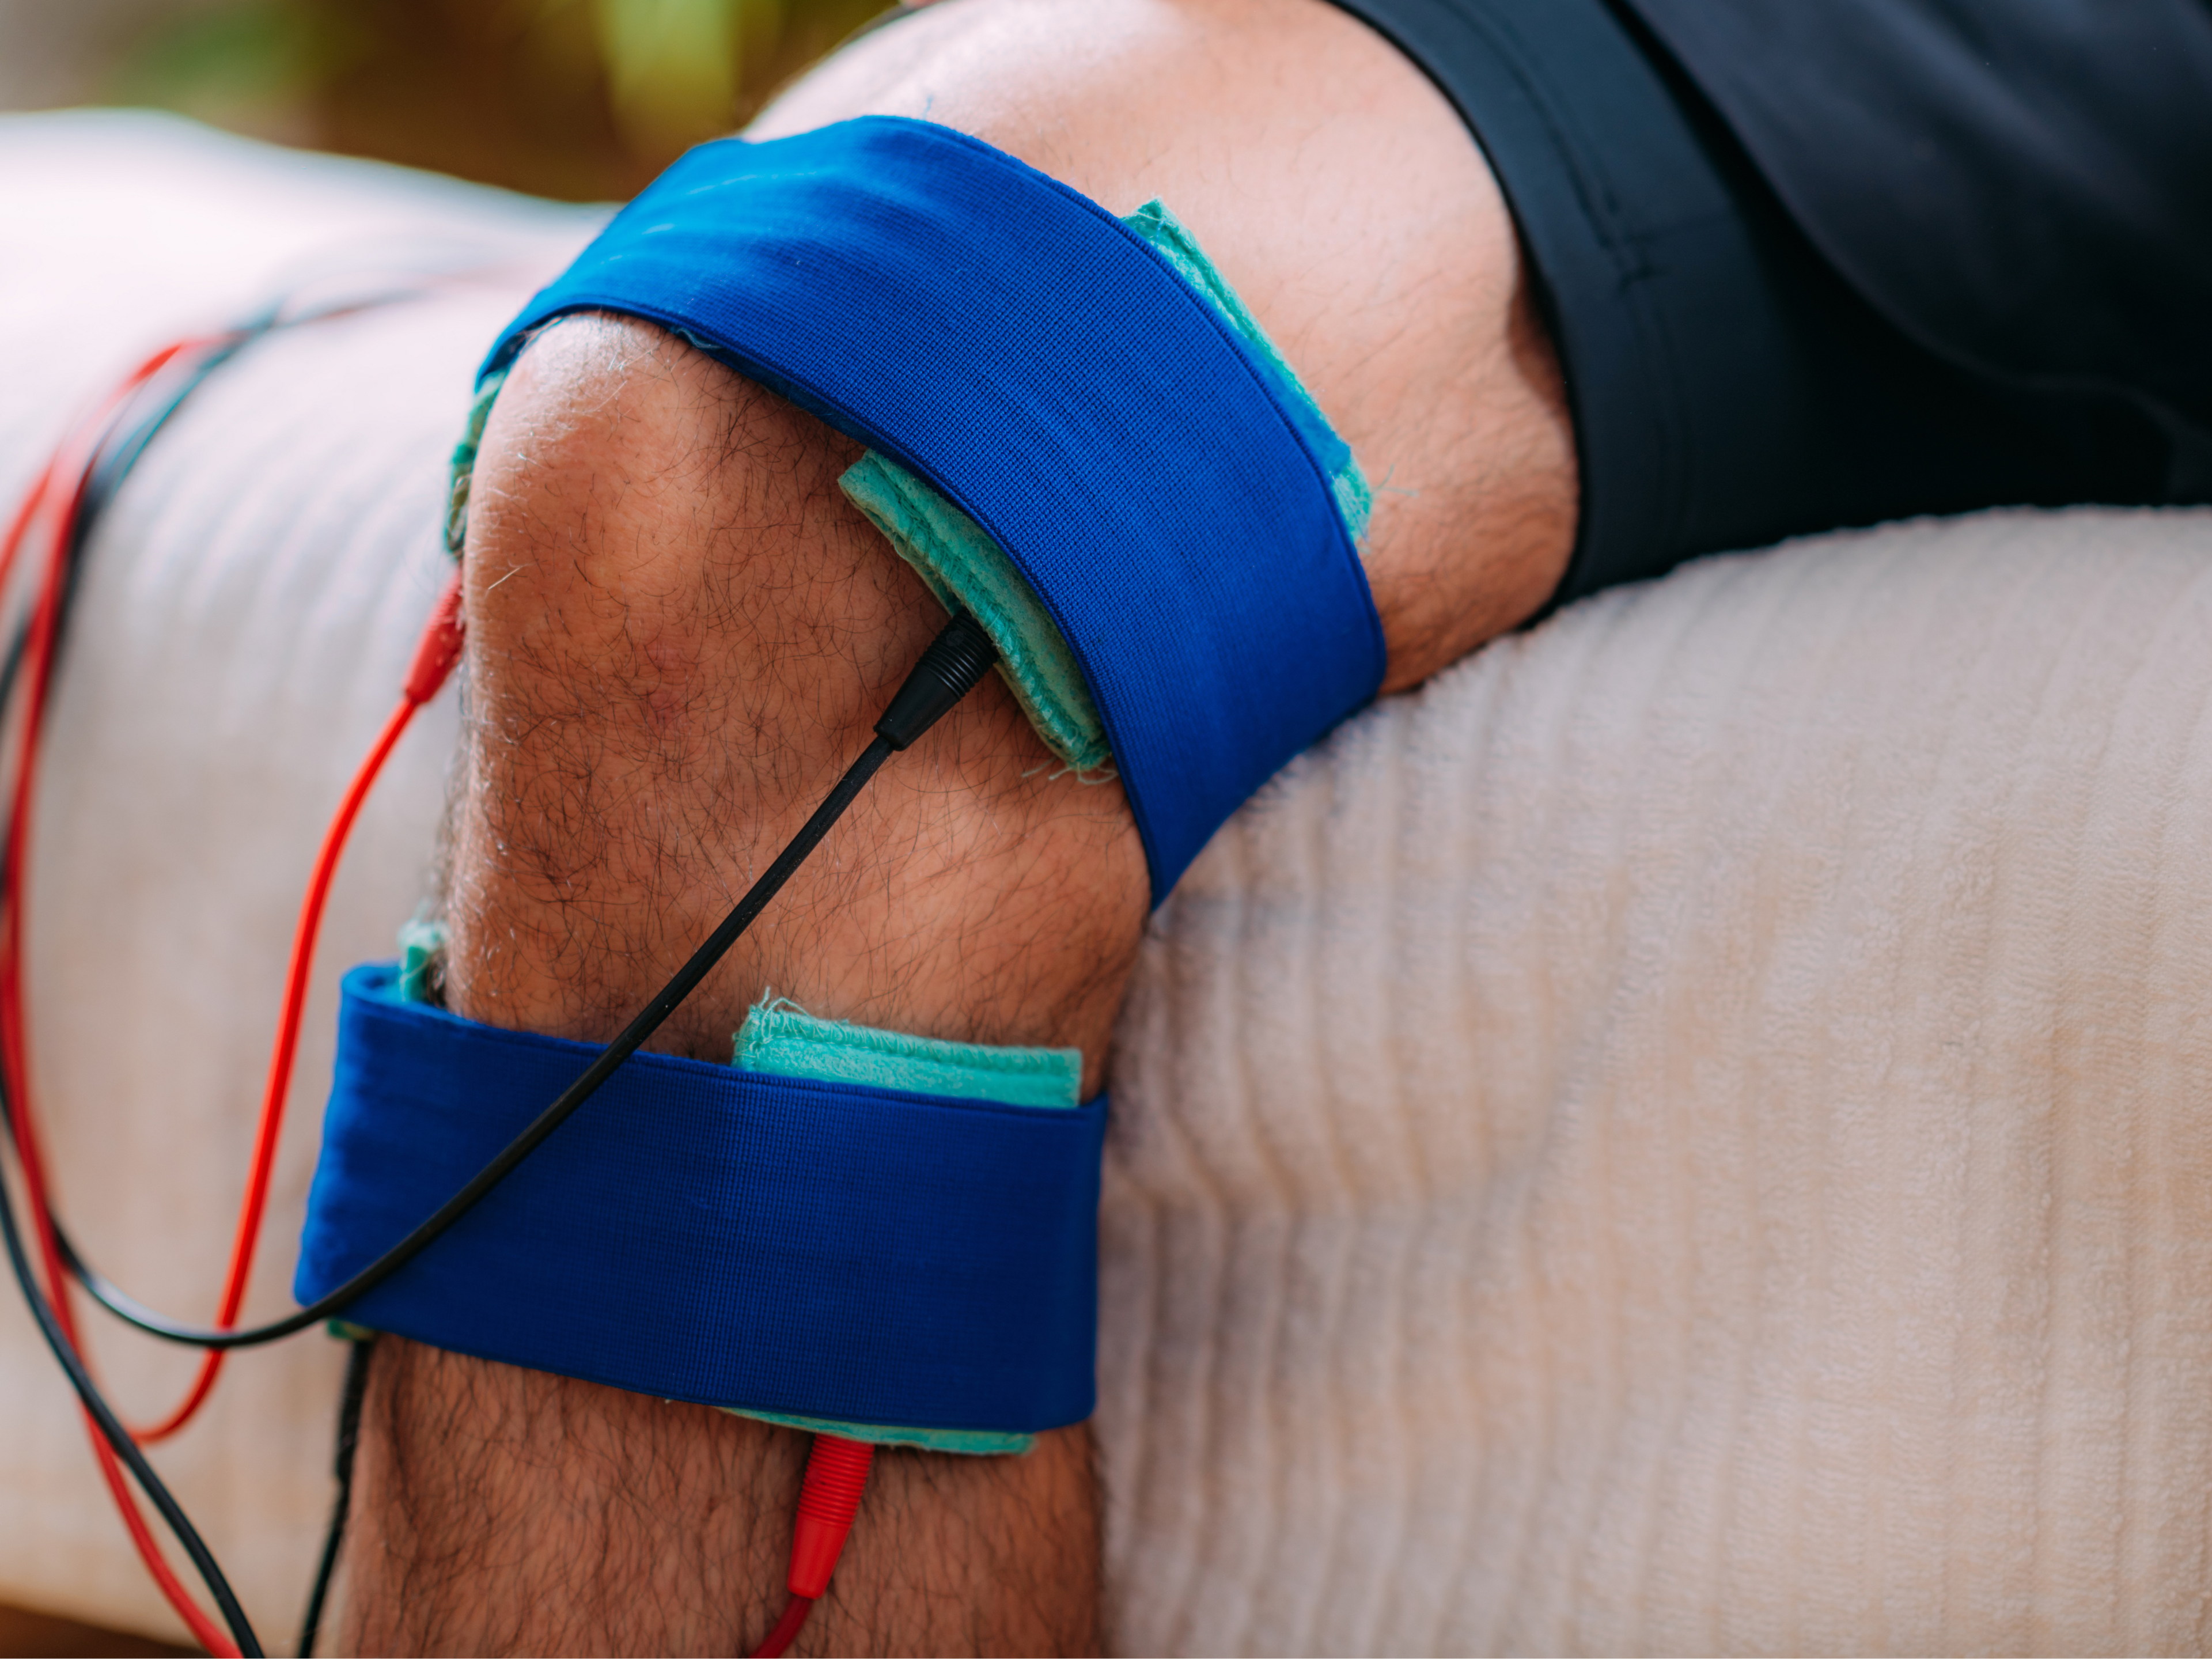 Electrotherapy is a potential treatment for patellar tendonitis pain.